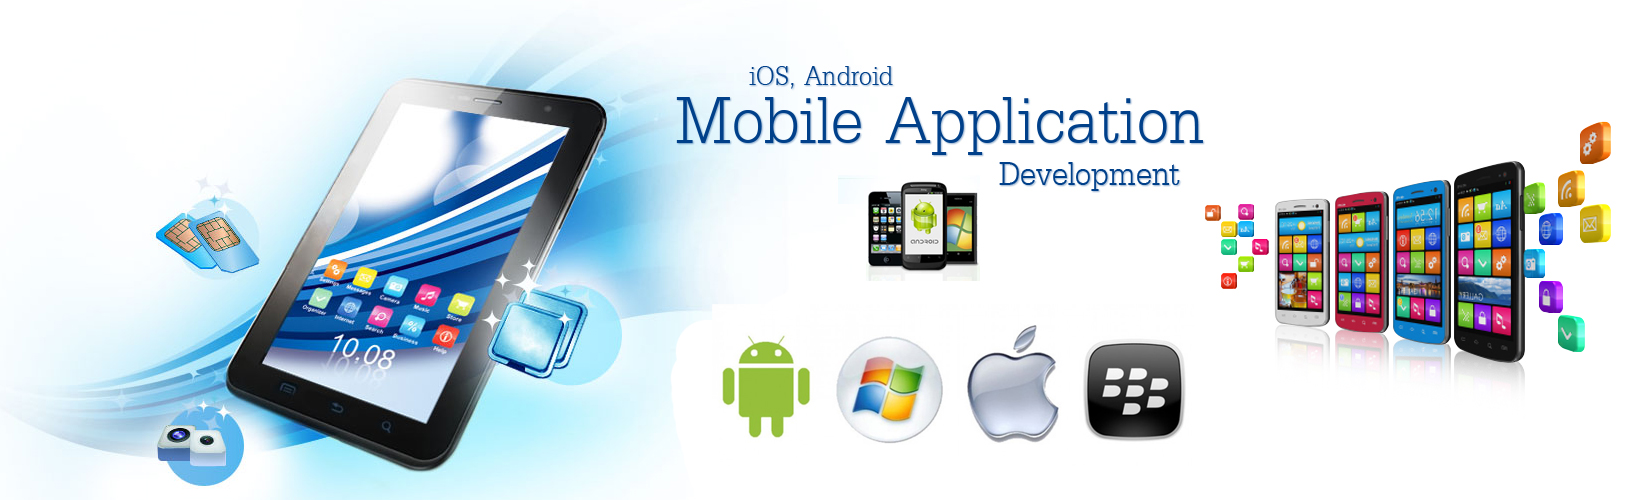 Mobile App Development Company In Sydney – Everything You Need to Know